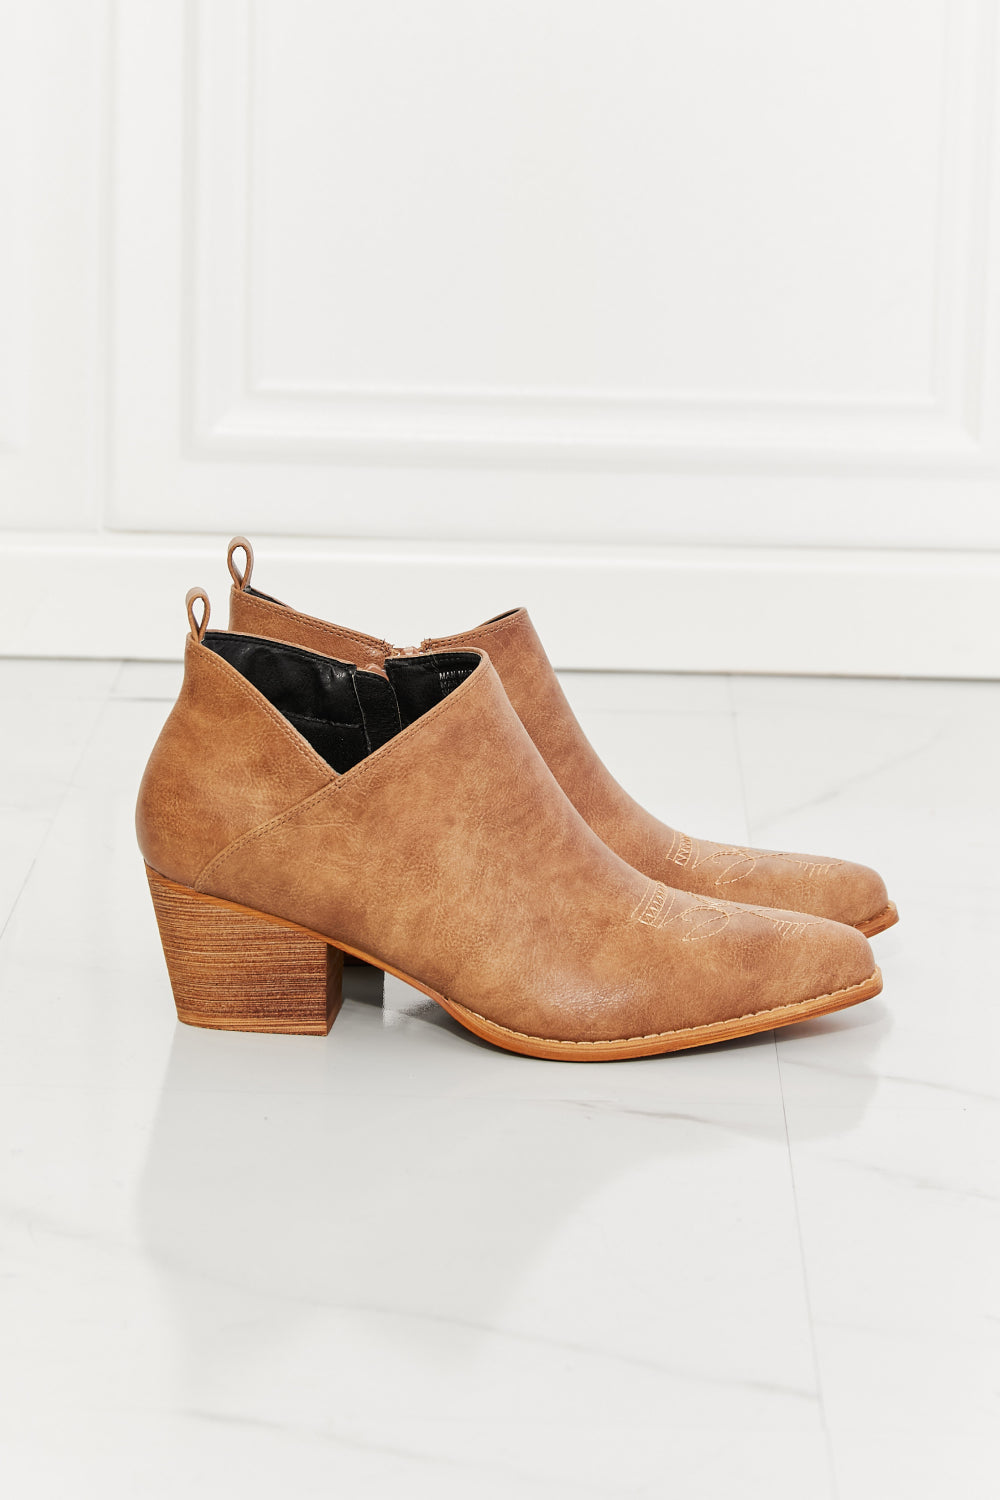 MMShoes Trust Yourself Embroidered Crossover Cowboy Bootie in Caramel - Cheeky Chic Boutique